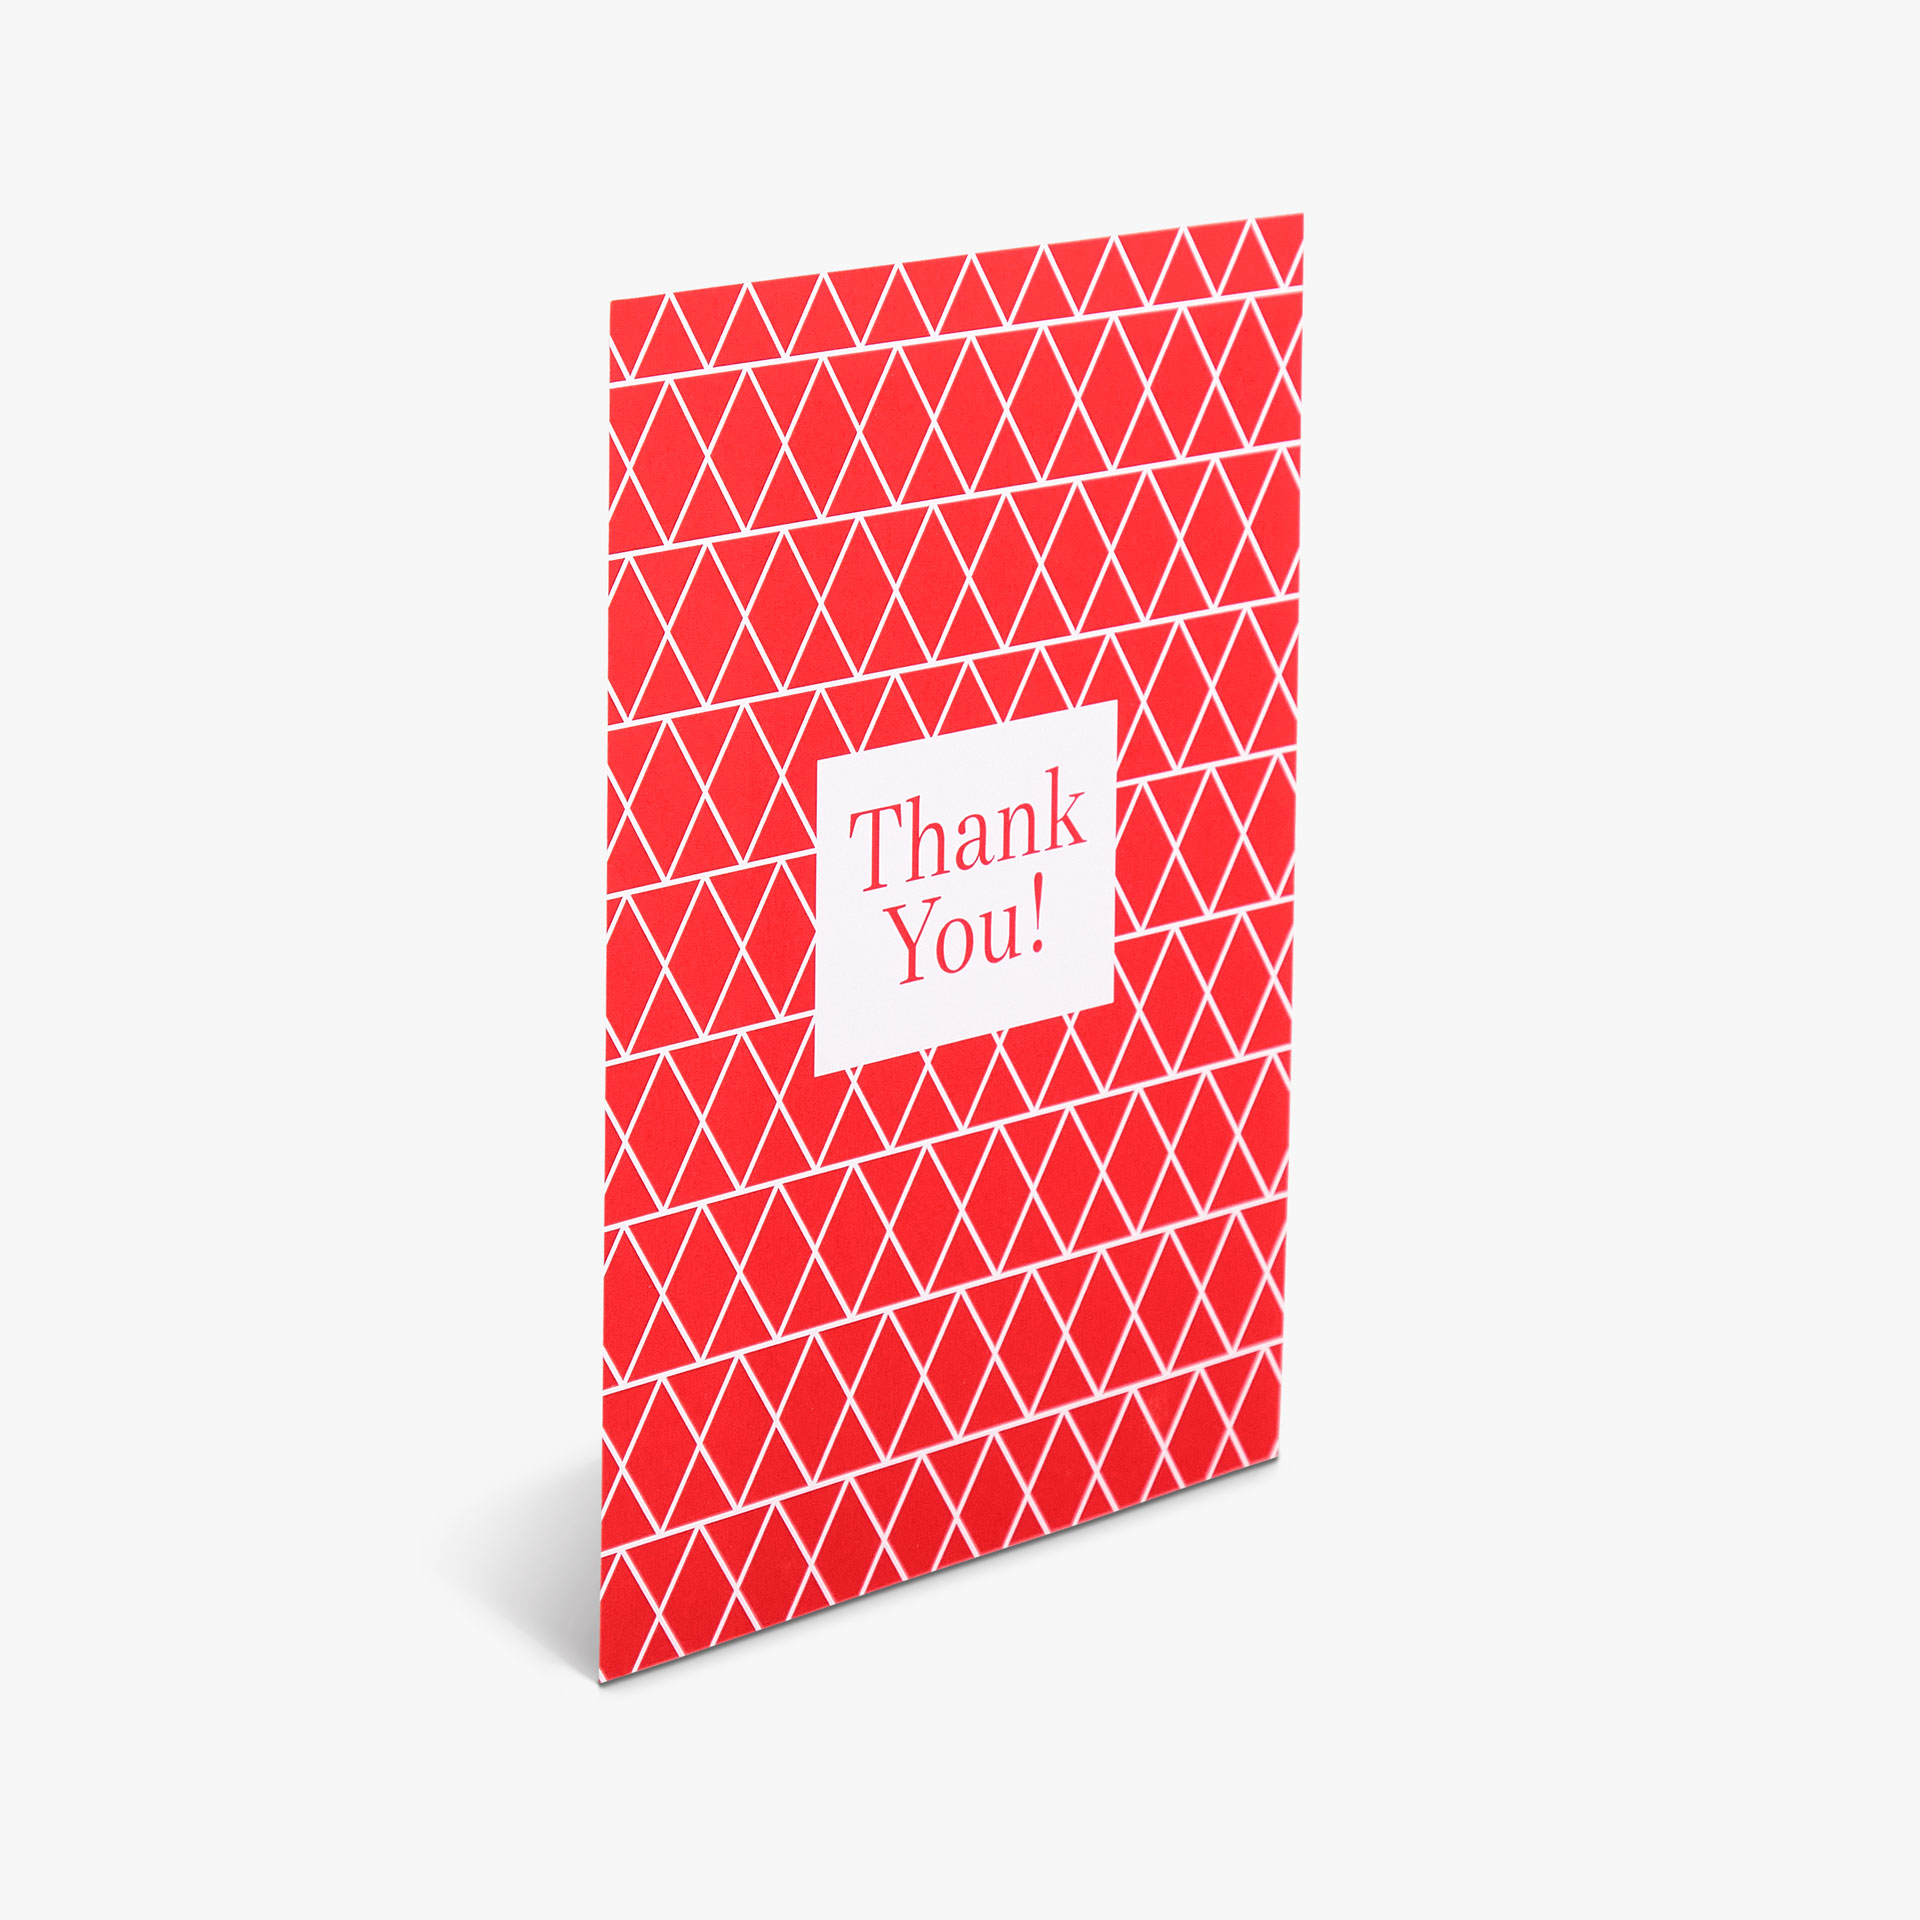 Thanks notecards,Stationery notecards,Thank you notecards,Notecards wi